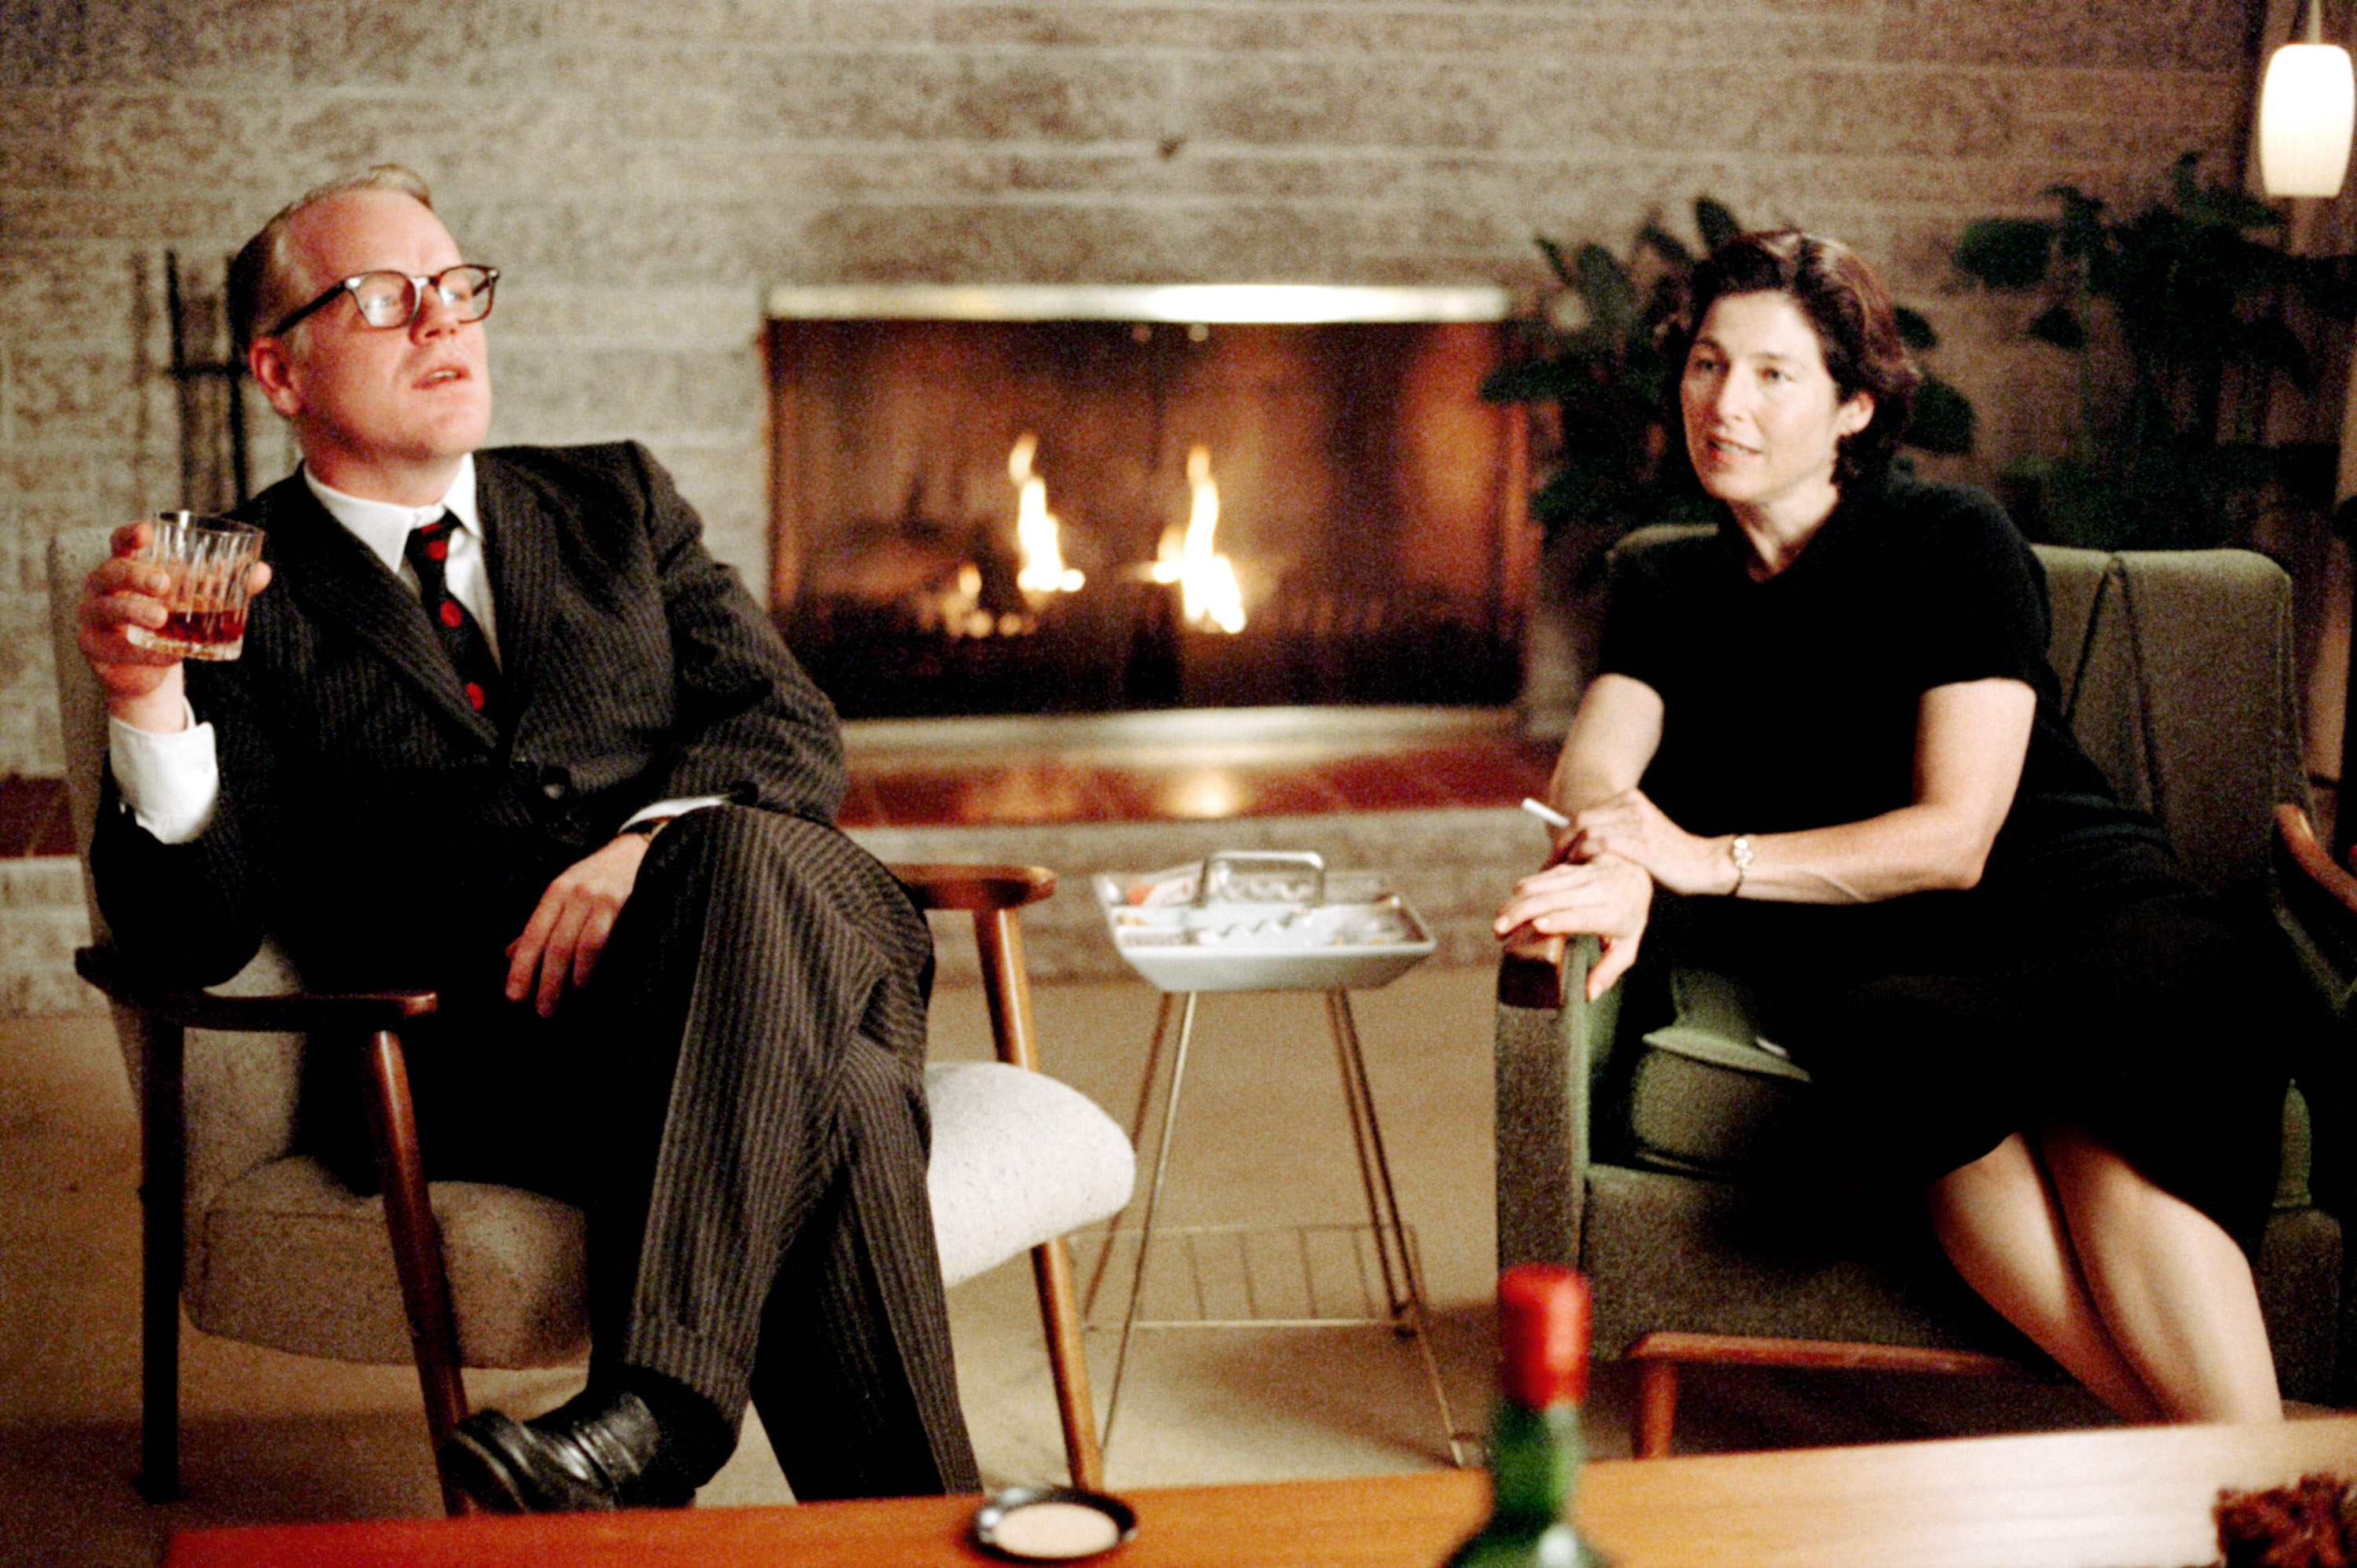 Philip Seymour Hoffmann and Catherine Keener sit in chairs smoking